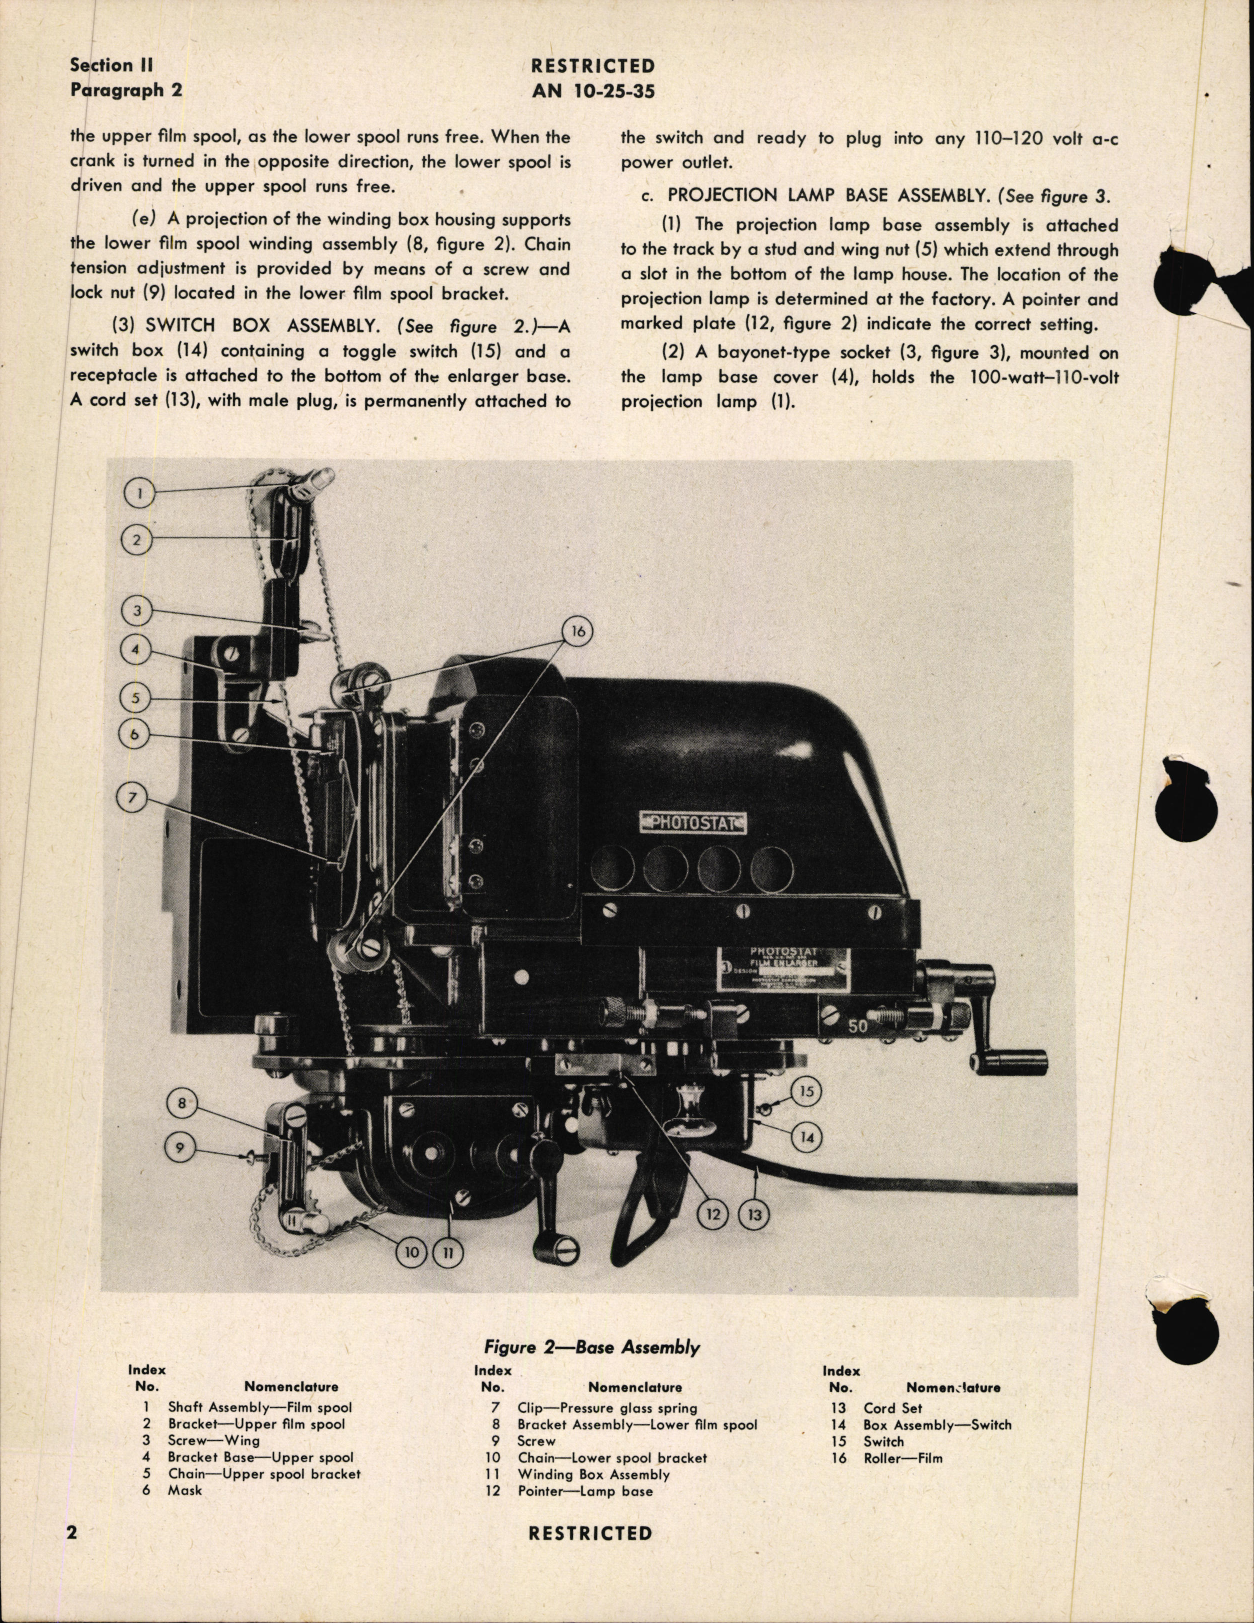 Sample page 6 from AirCorps Library document: Handbook of Instructions with Parts Catalog for Photostat Film Enlarger